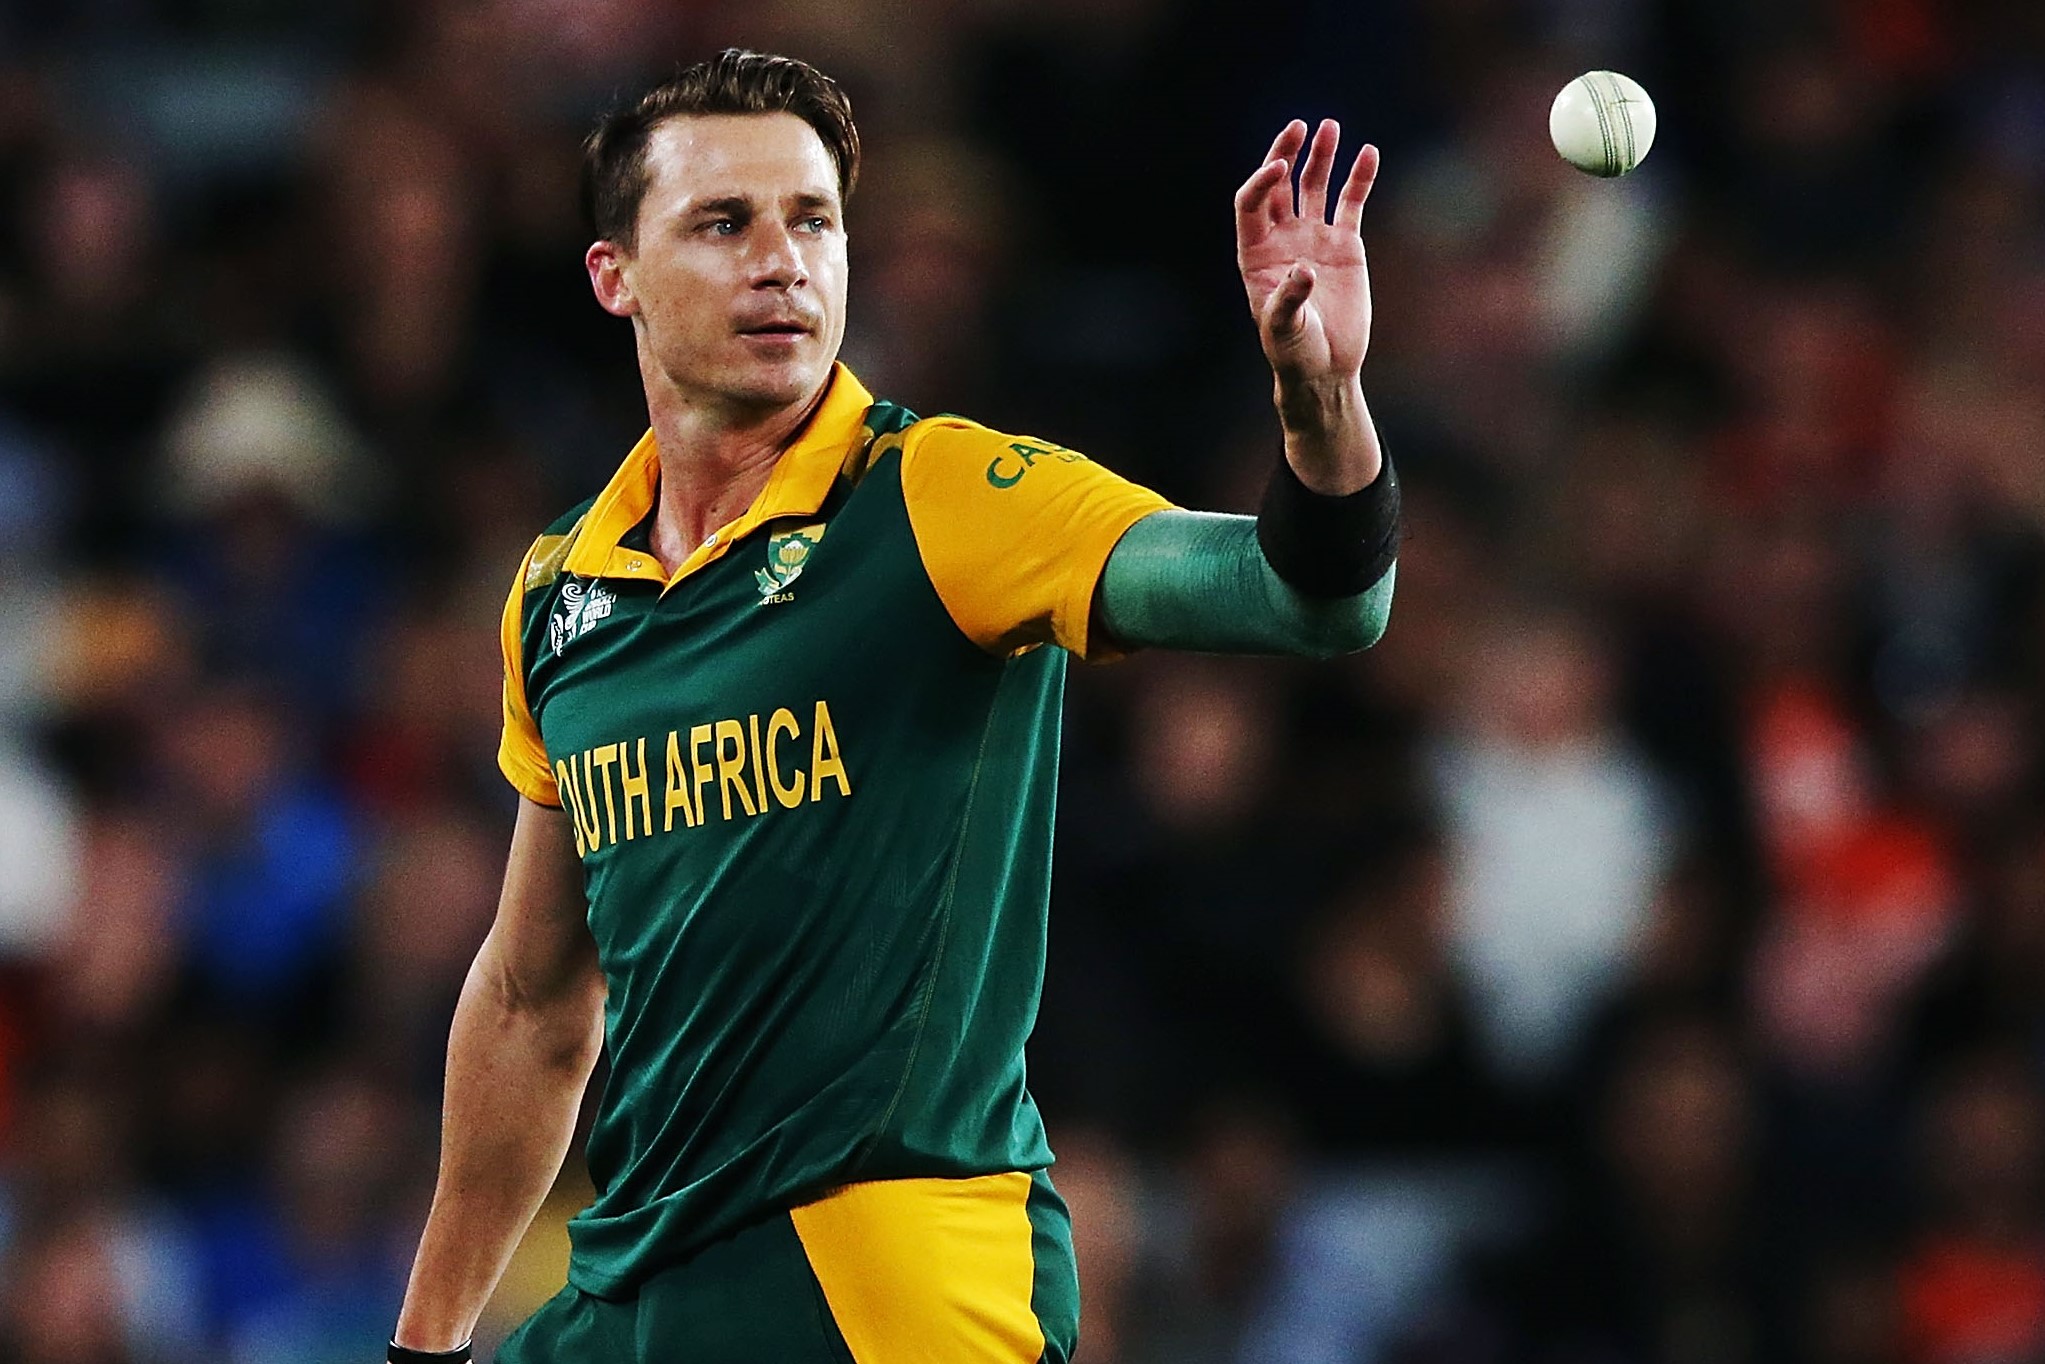 Dale Steyn says "KKR's luck is going to catch up to them in the final" in IPL 2021